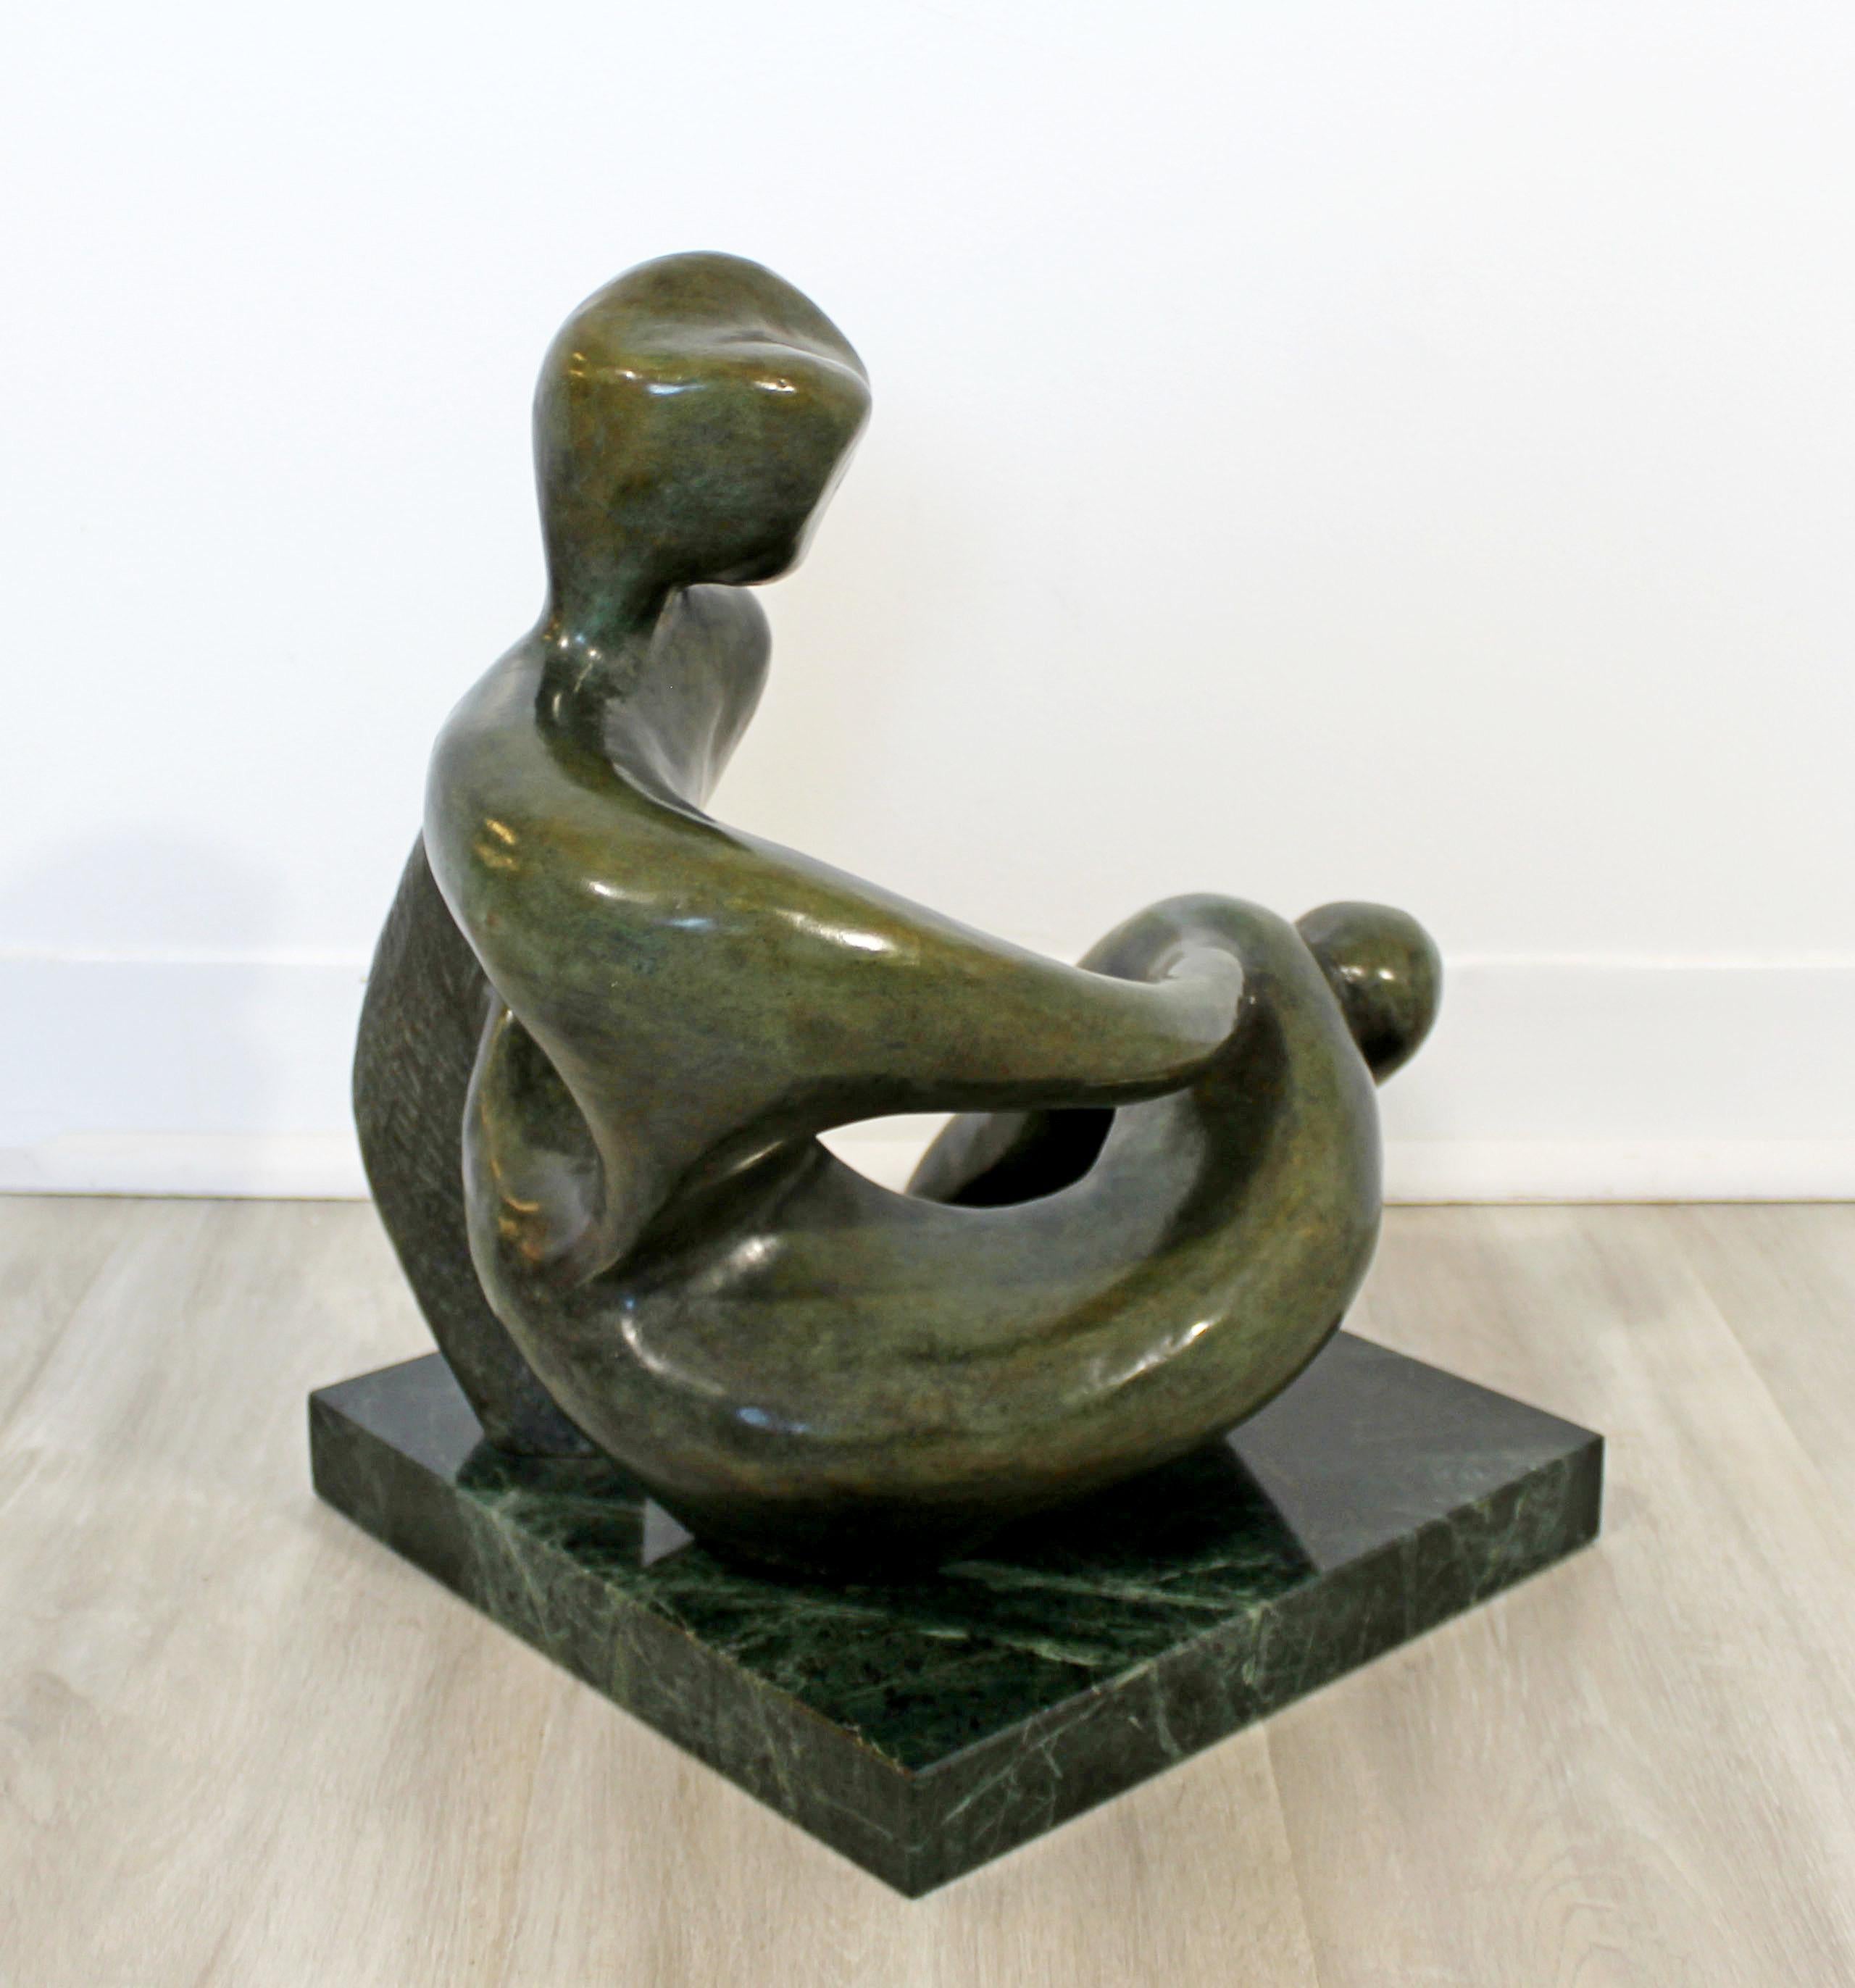 For your consideration is a stunning, bronze table sculpture, 